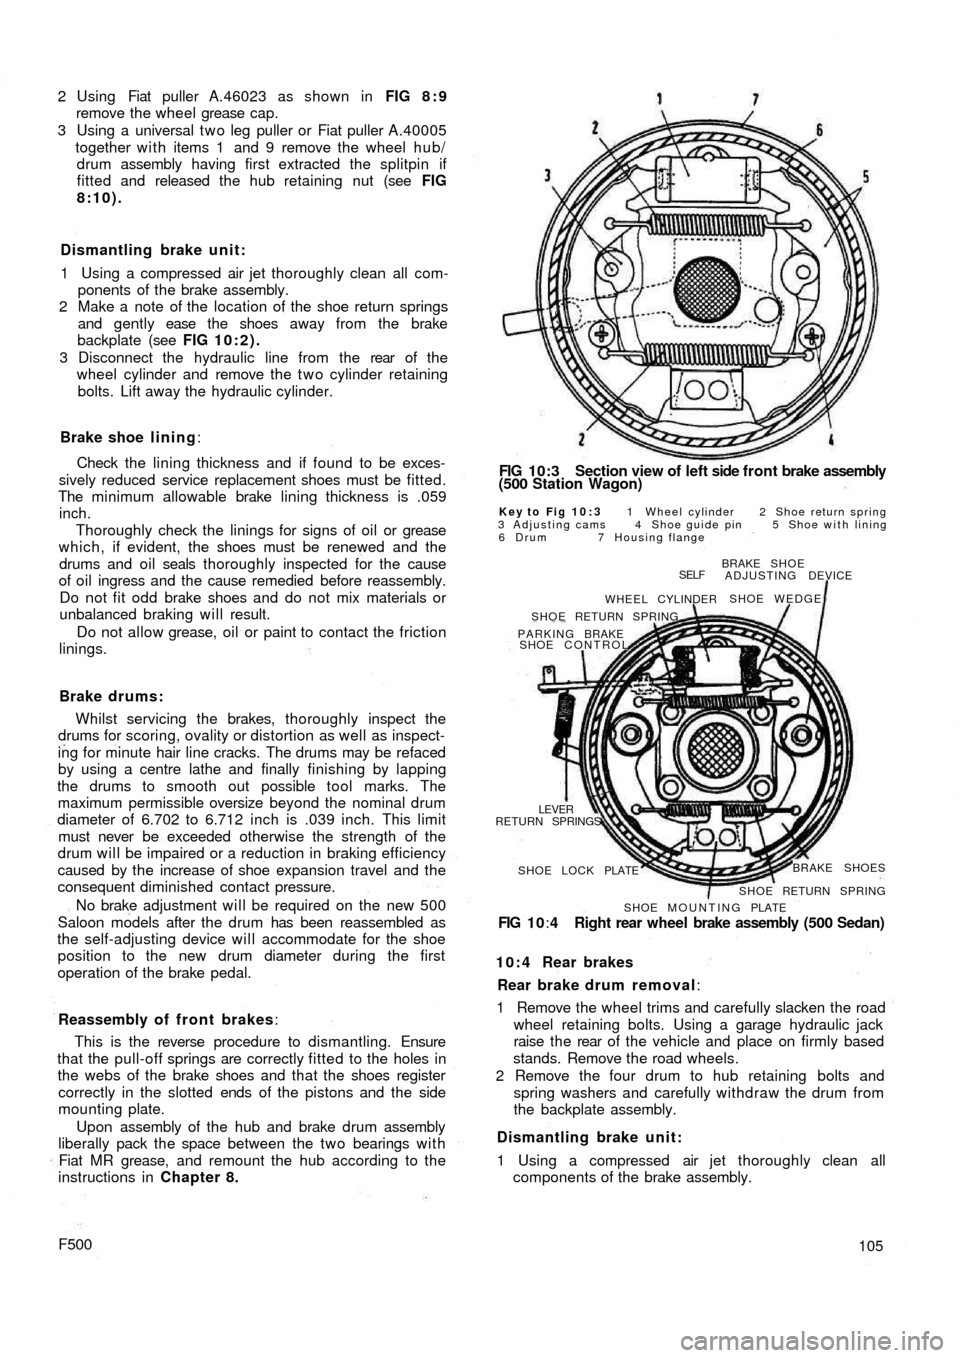 FIAT 500 1957 1.G User Guide 2 Using  Fiat puller A.46023 as shown in FIG 8 : 9
remove the wheel grease cap.
3 Using a universal t w o leg puller or Fiat puller A.40005
together w i t h items 1  and 9 remove the wheel hub/
drum a